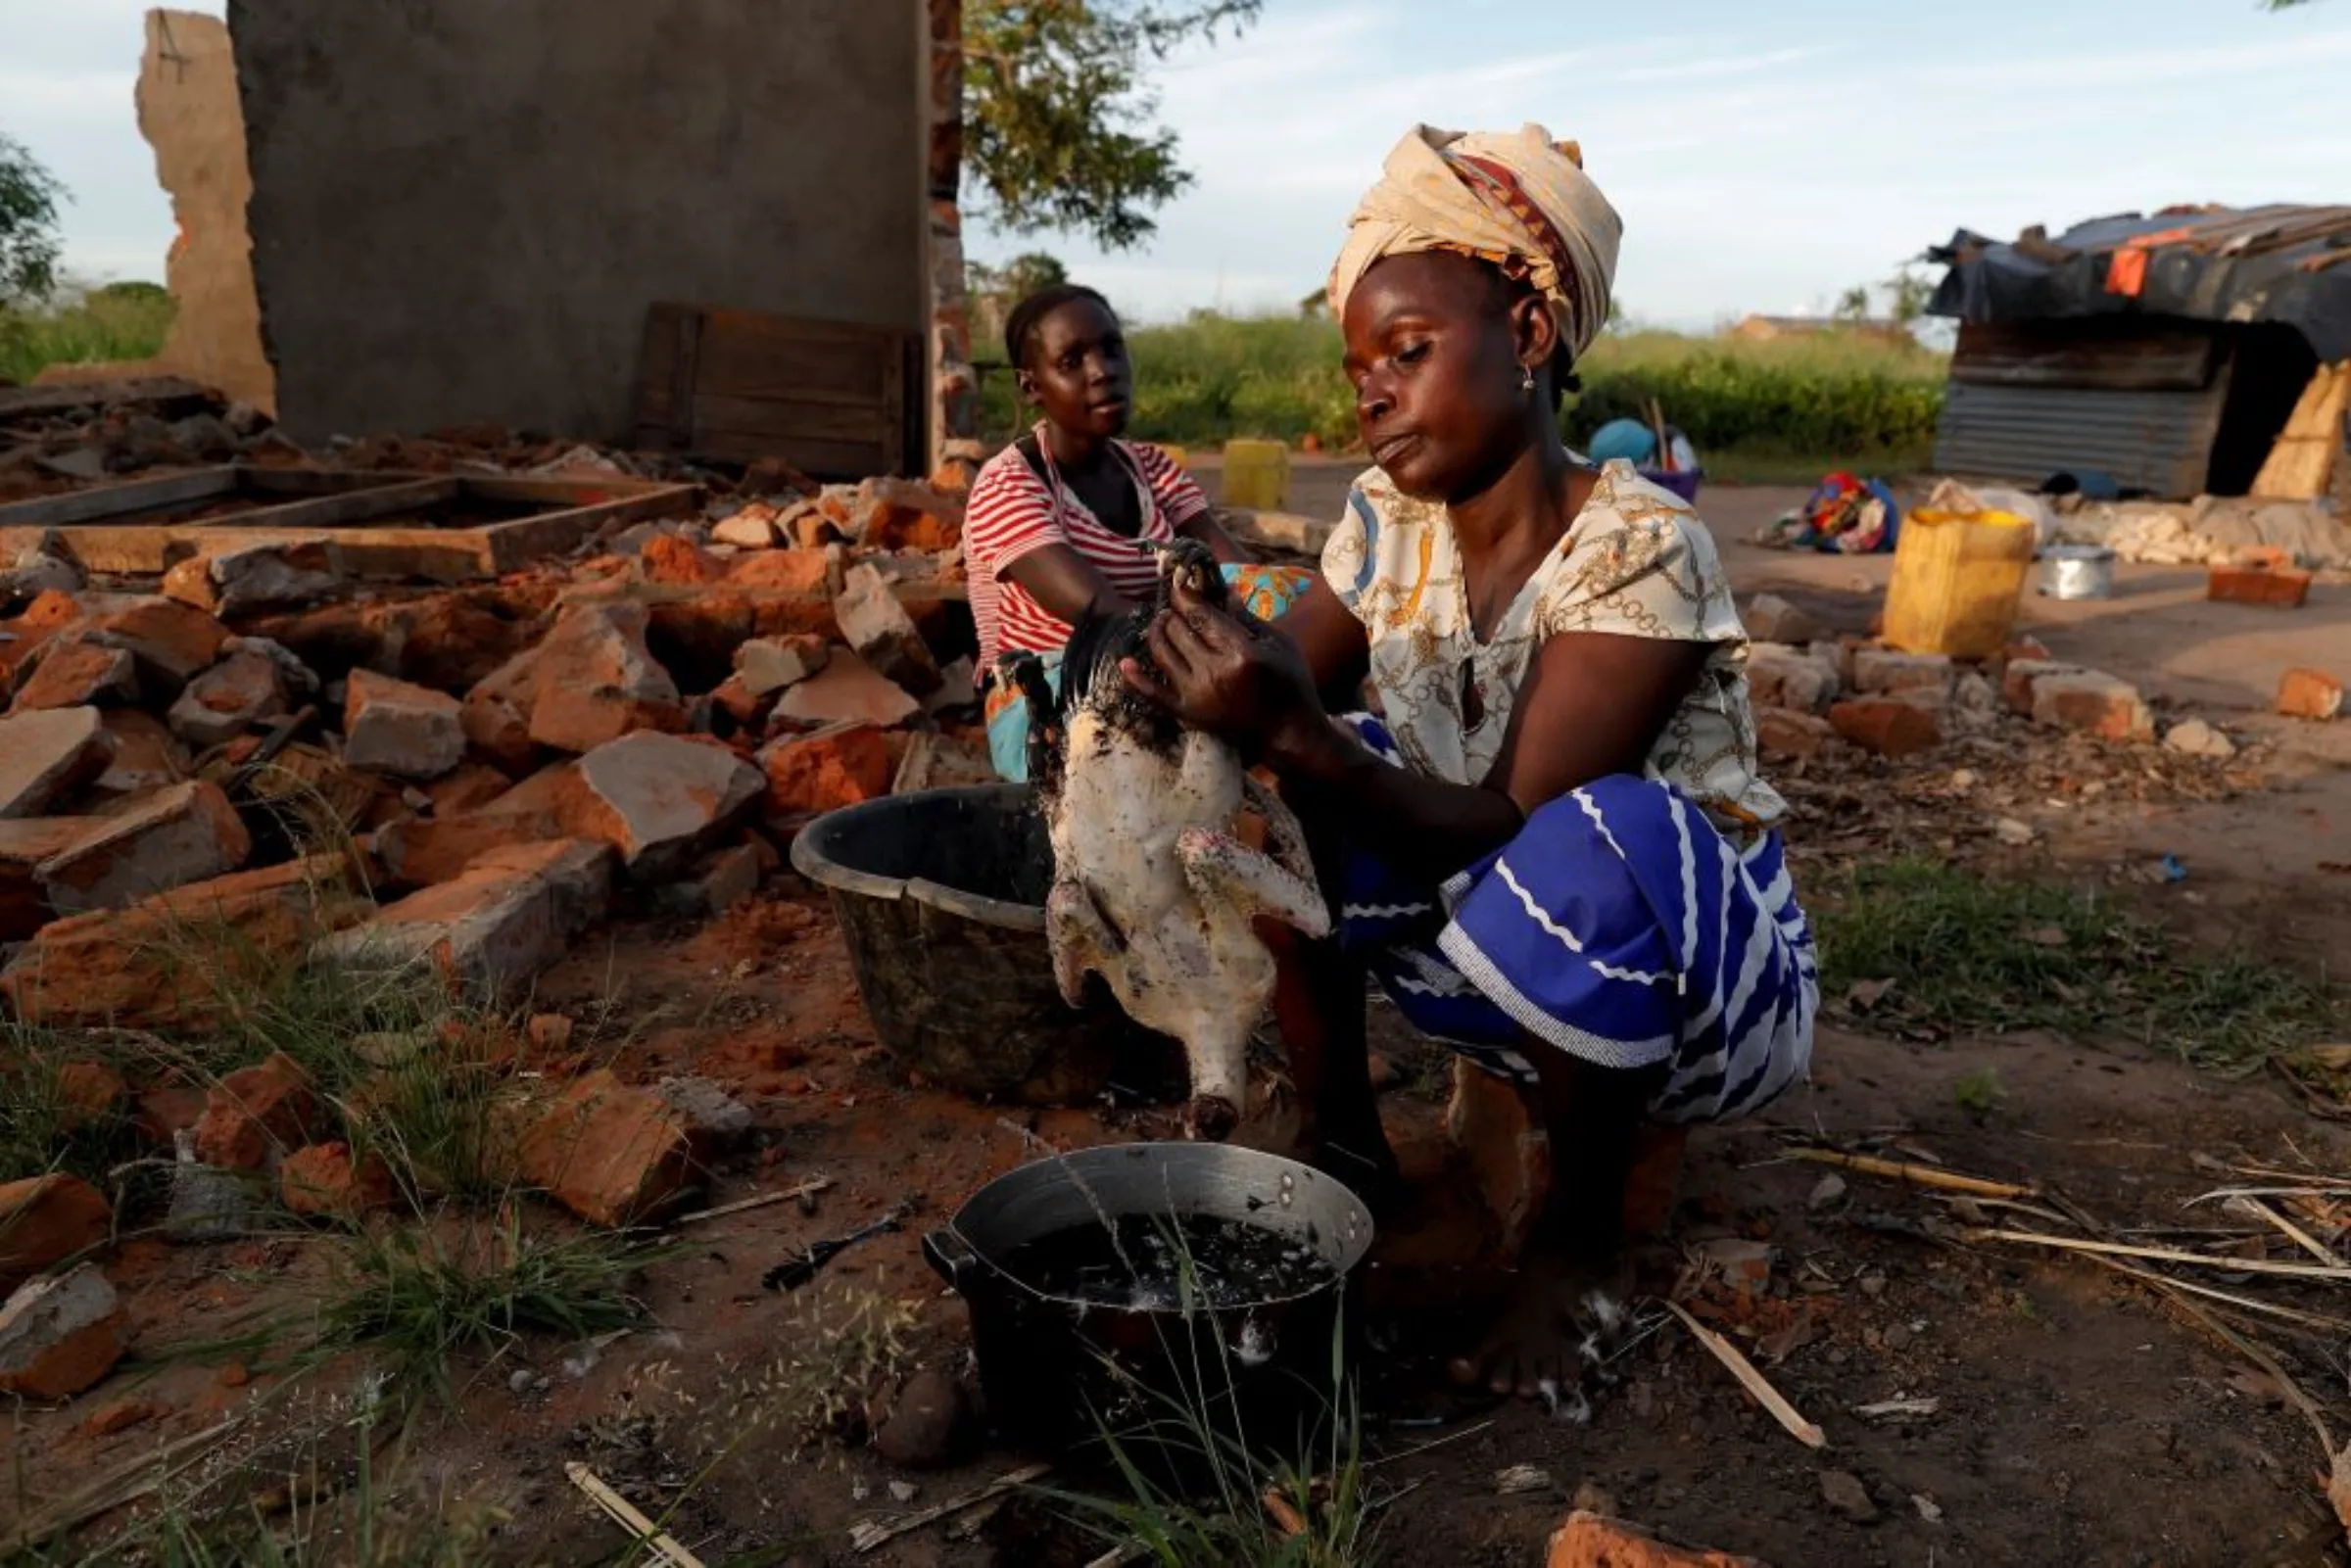 Women are preparing food beside their damaged house in the aftermath of Cyclone Idai, in the village of Cheia, which means 'Flood' in Portuguese, near Beira, Mozambique April 4, 2019